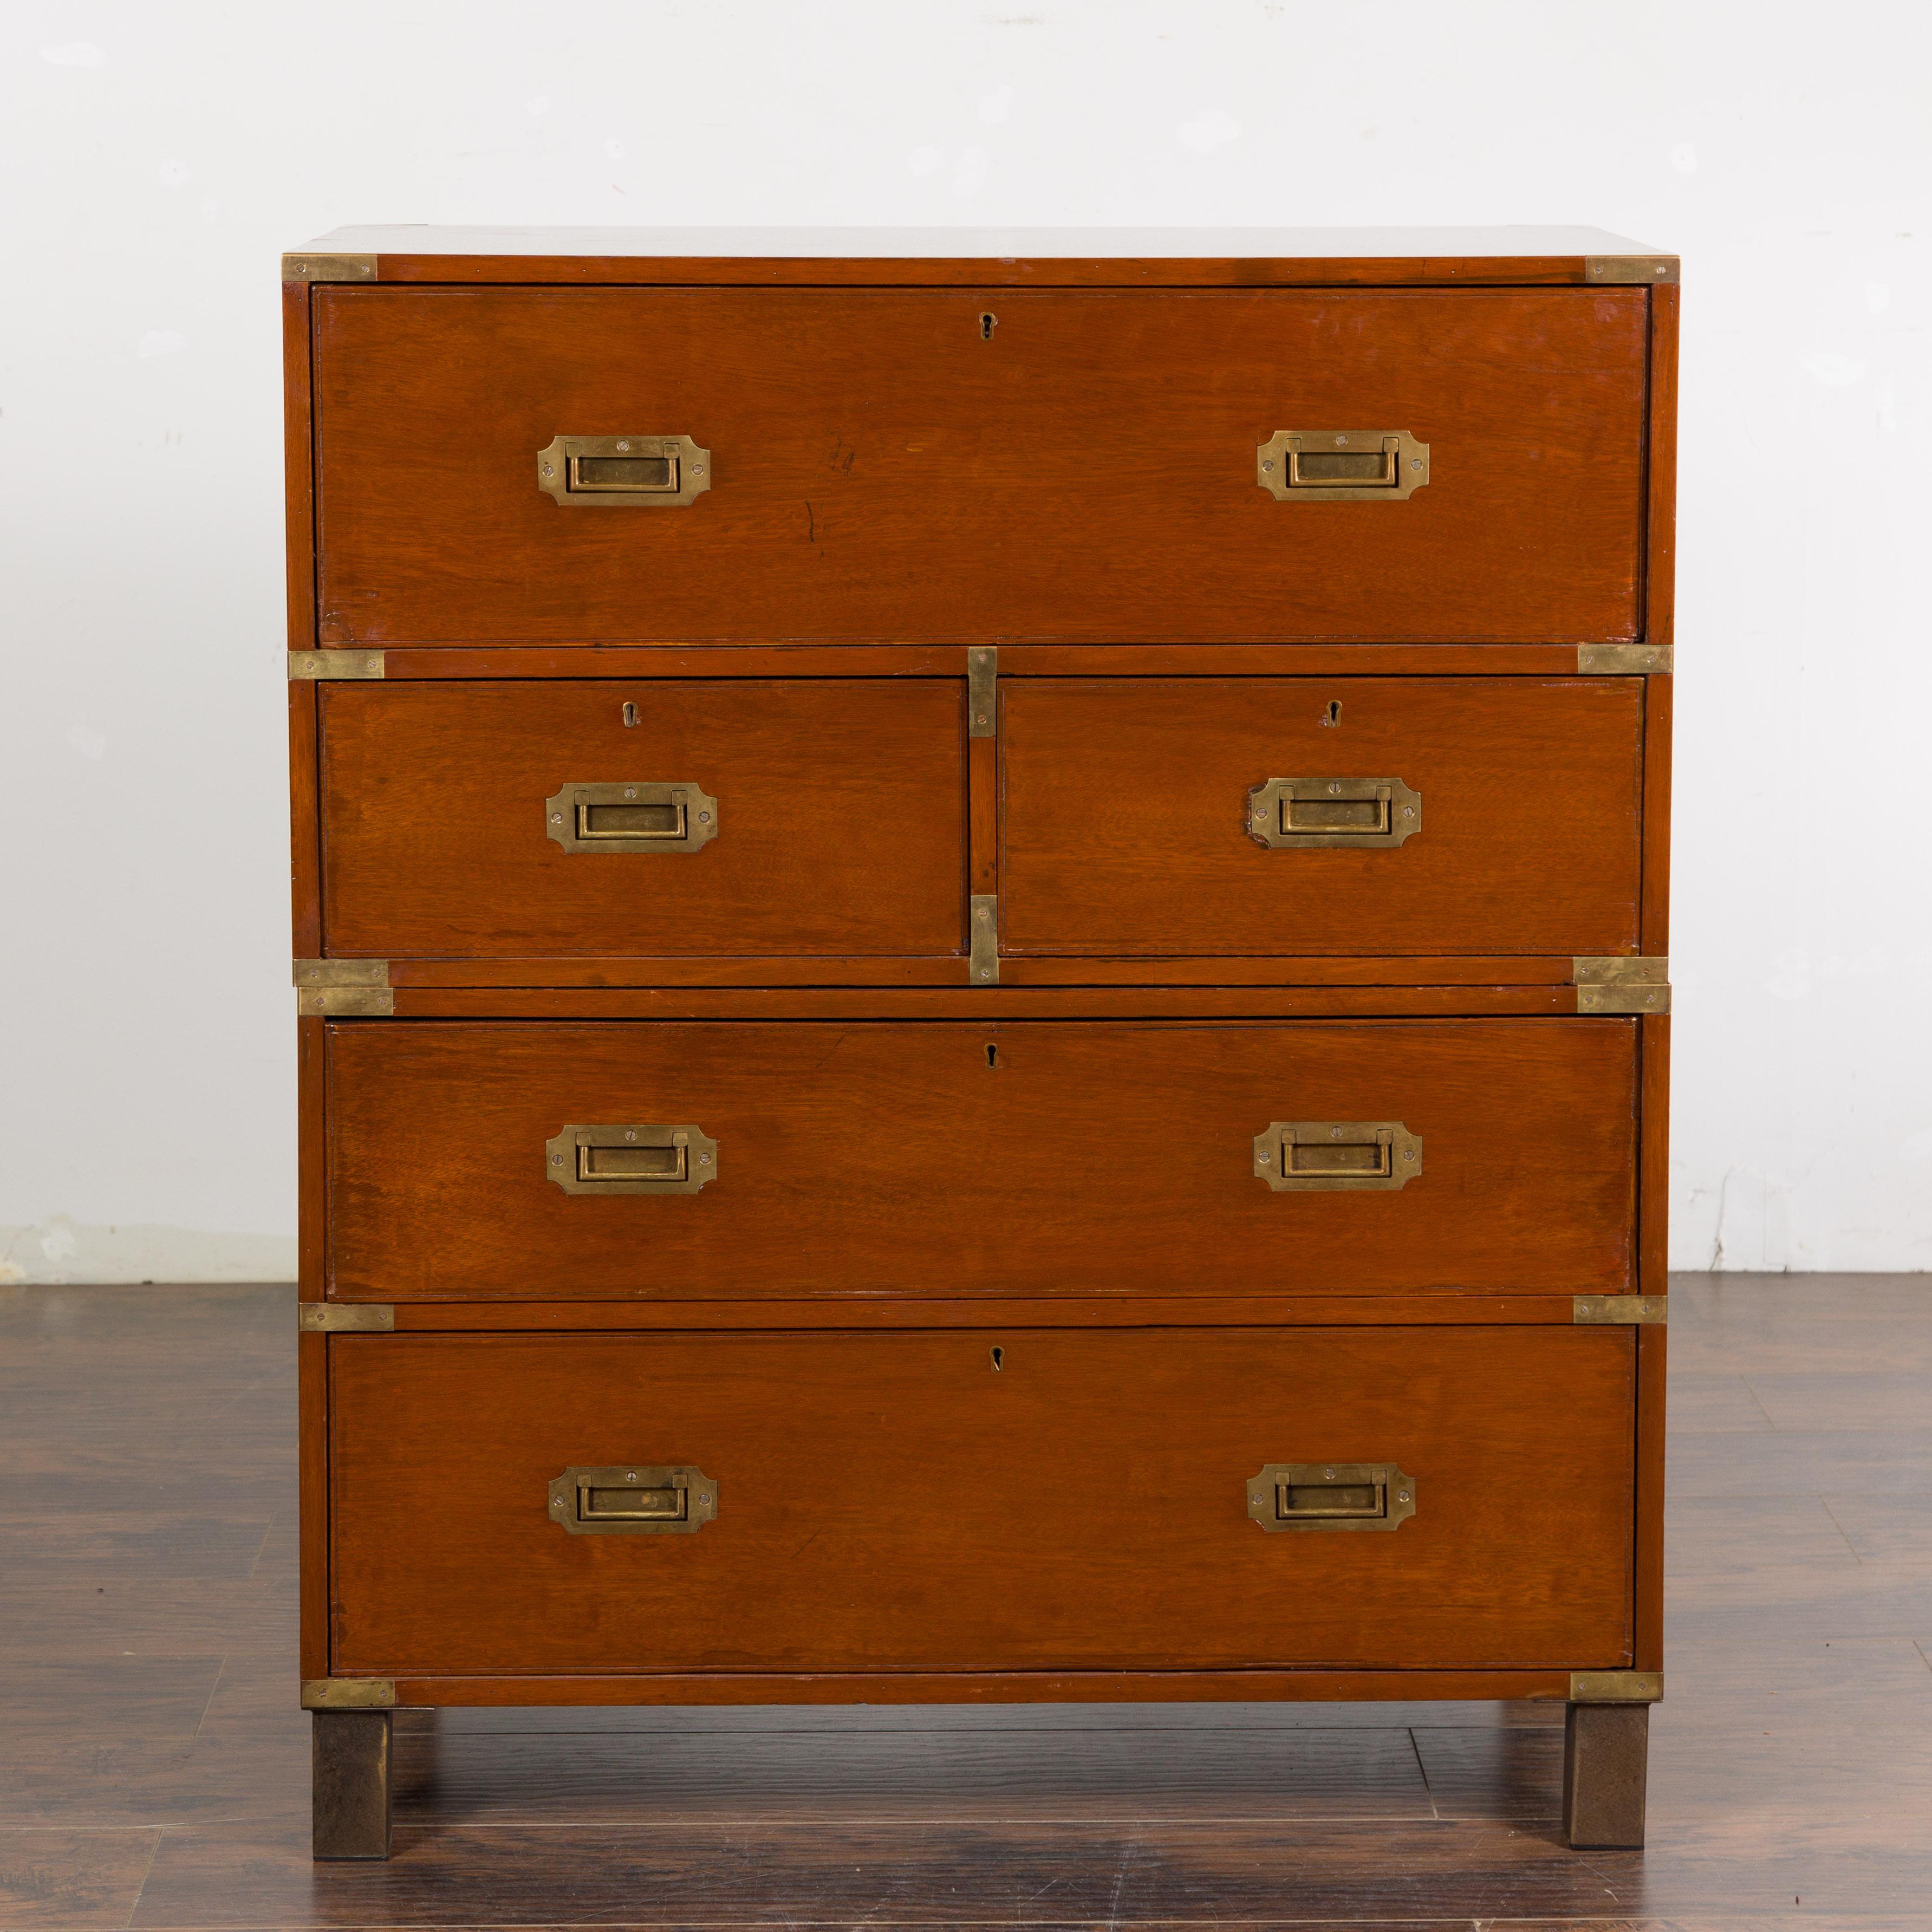 English 19th Century Campaign Chest with Drop Front Desk and Four Drawers In Good Condition For Sale In Atlanta, GA